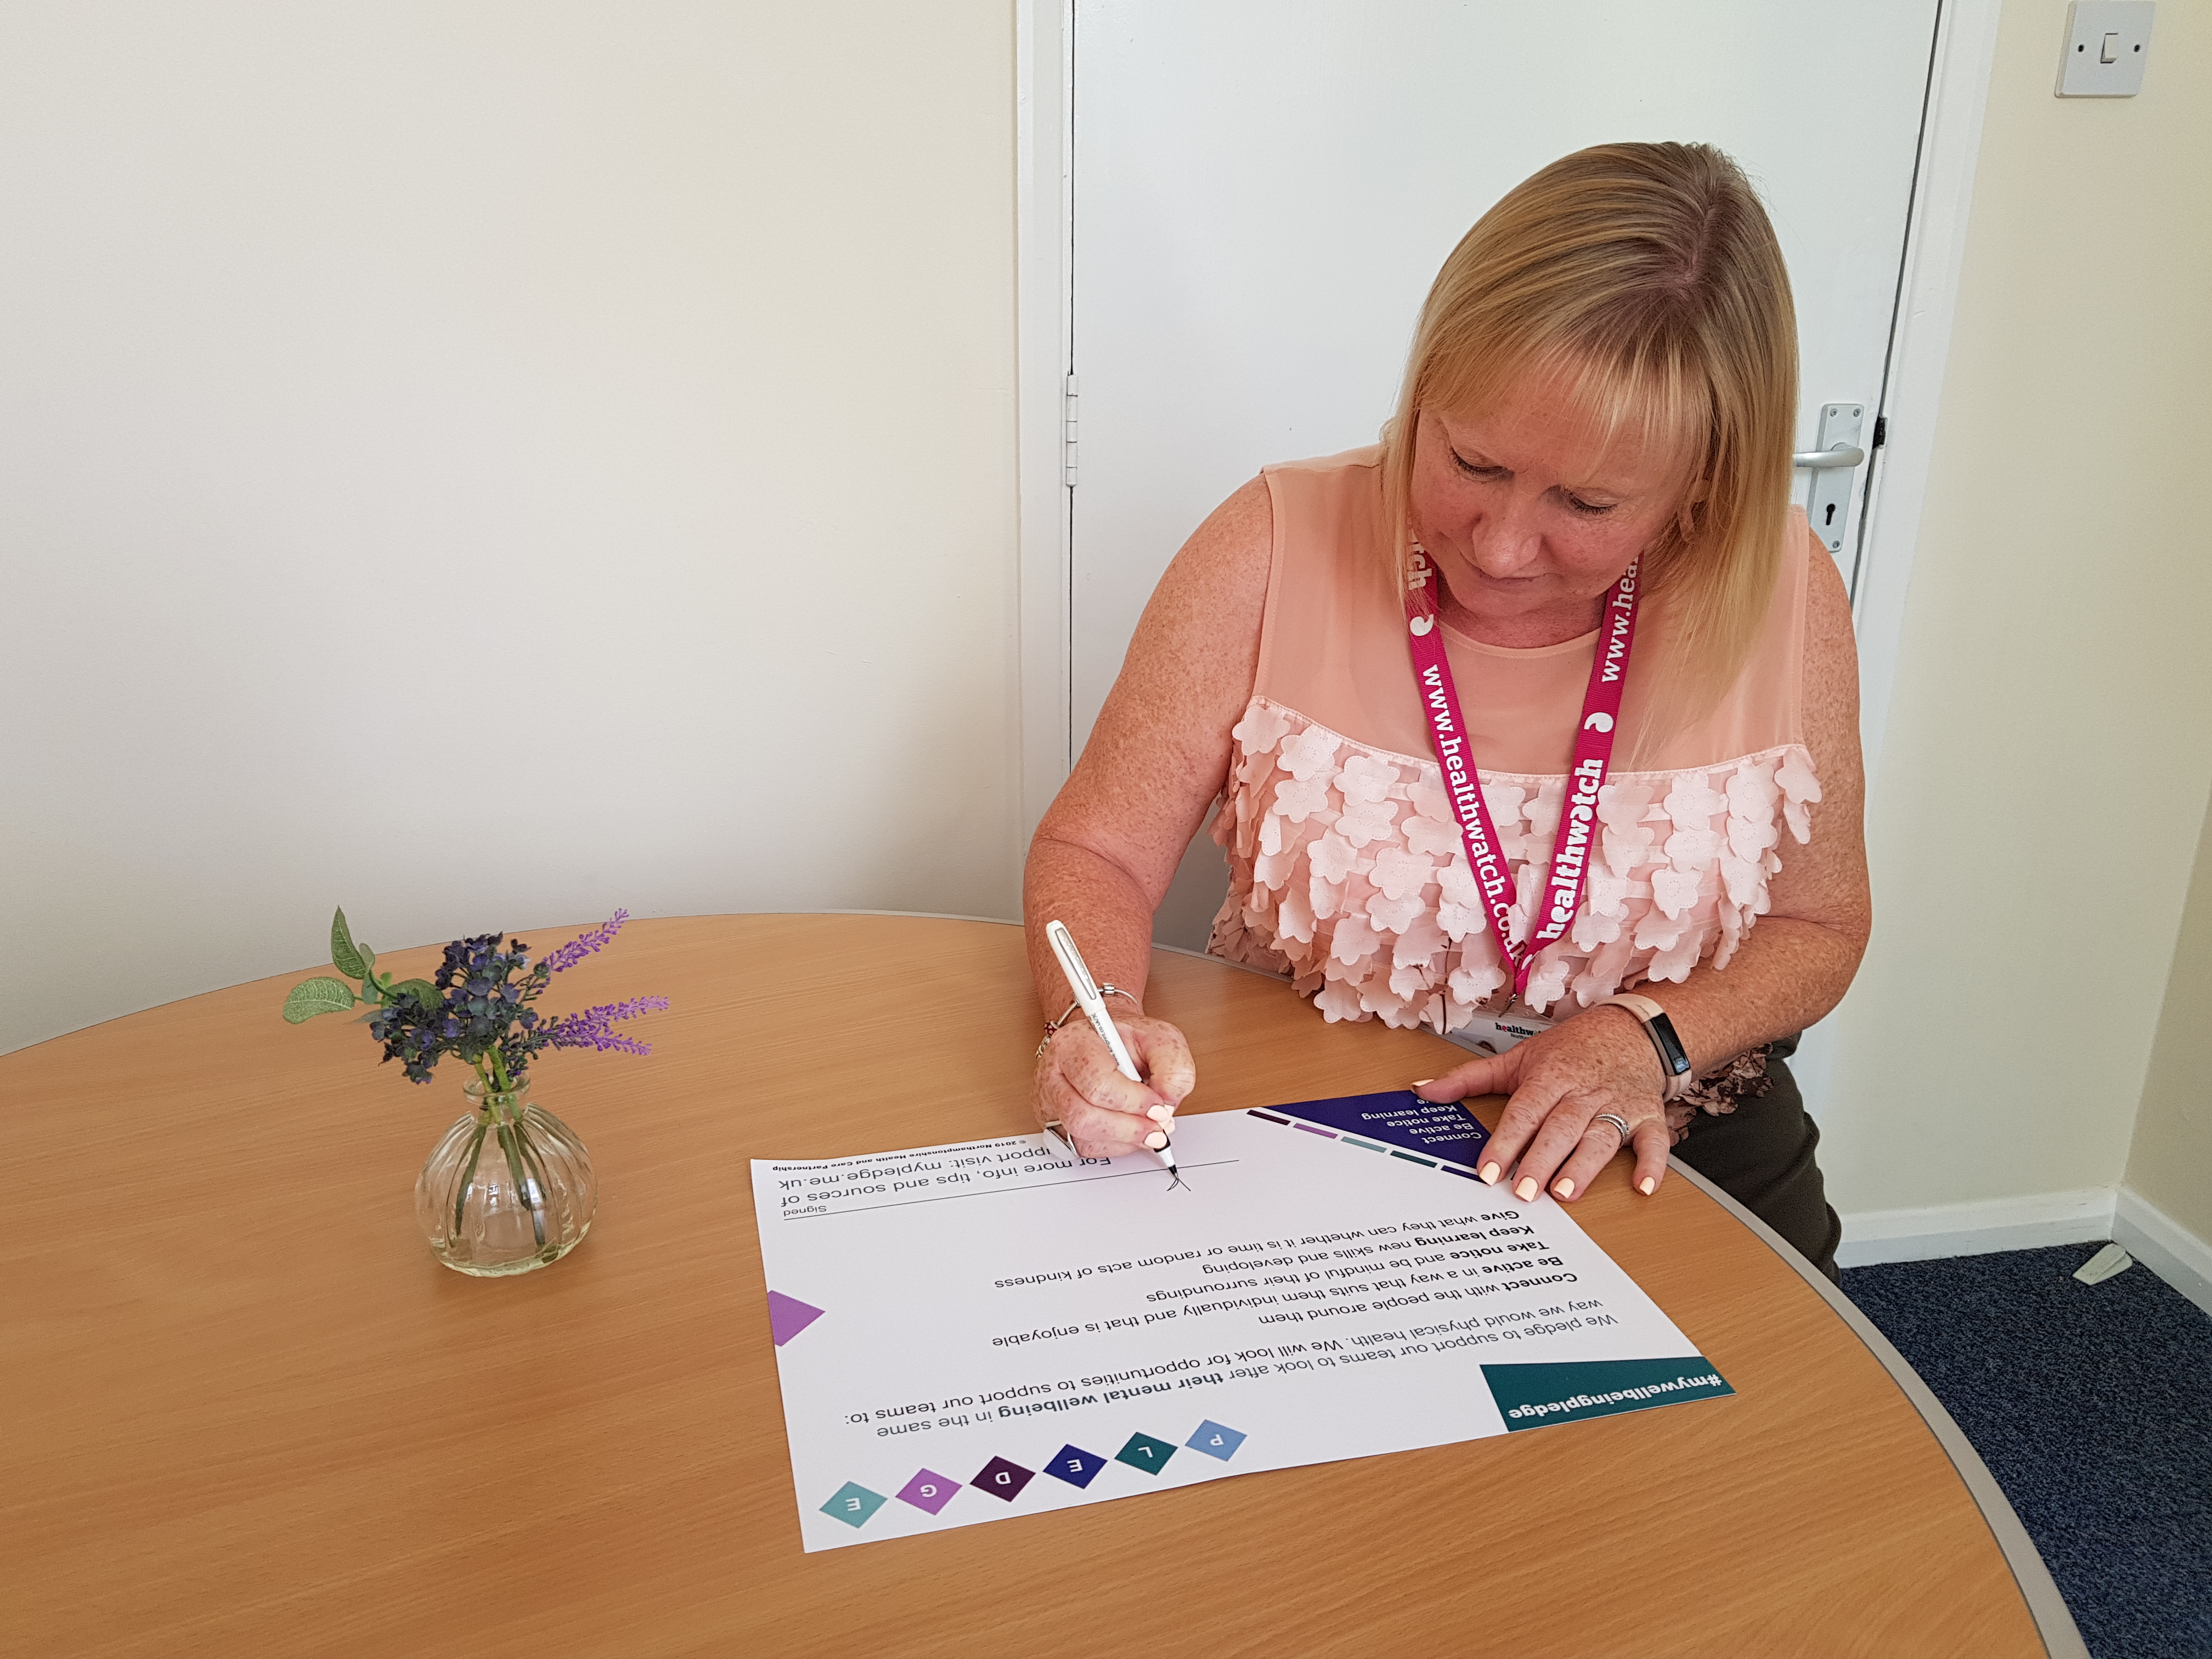 Kate Holt, CEO of Healthwatch Northamptonshire and Connected Together CIC, signing the wellbeing pledge.